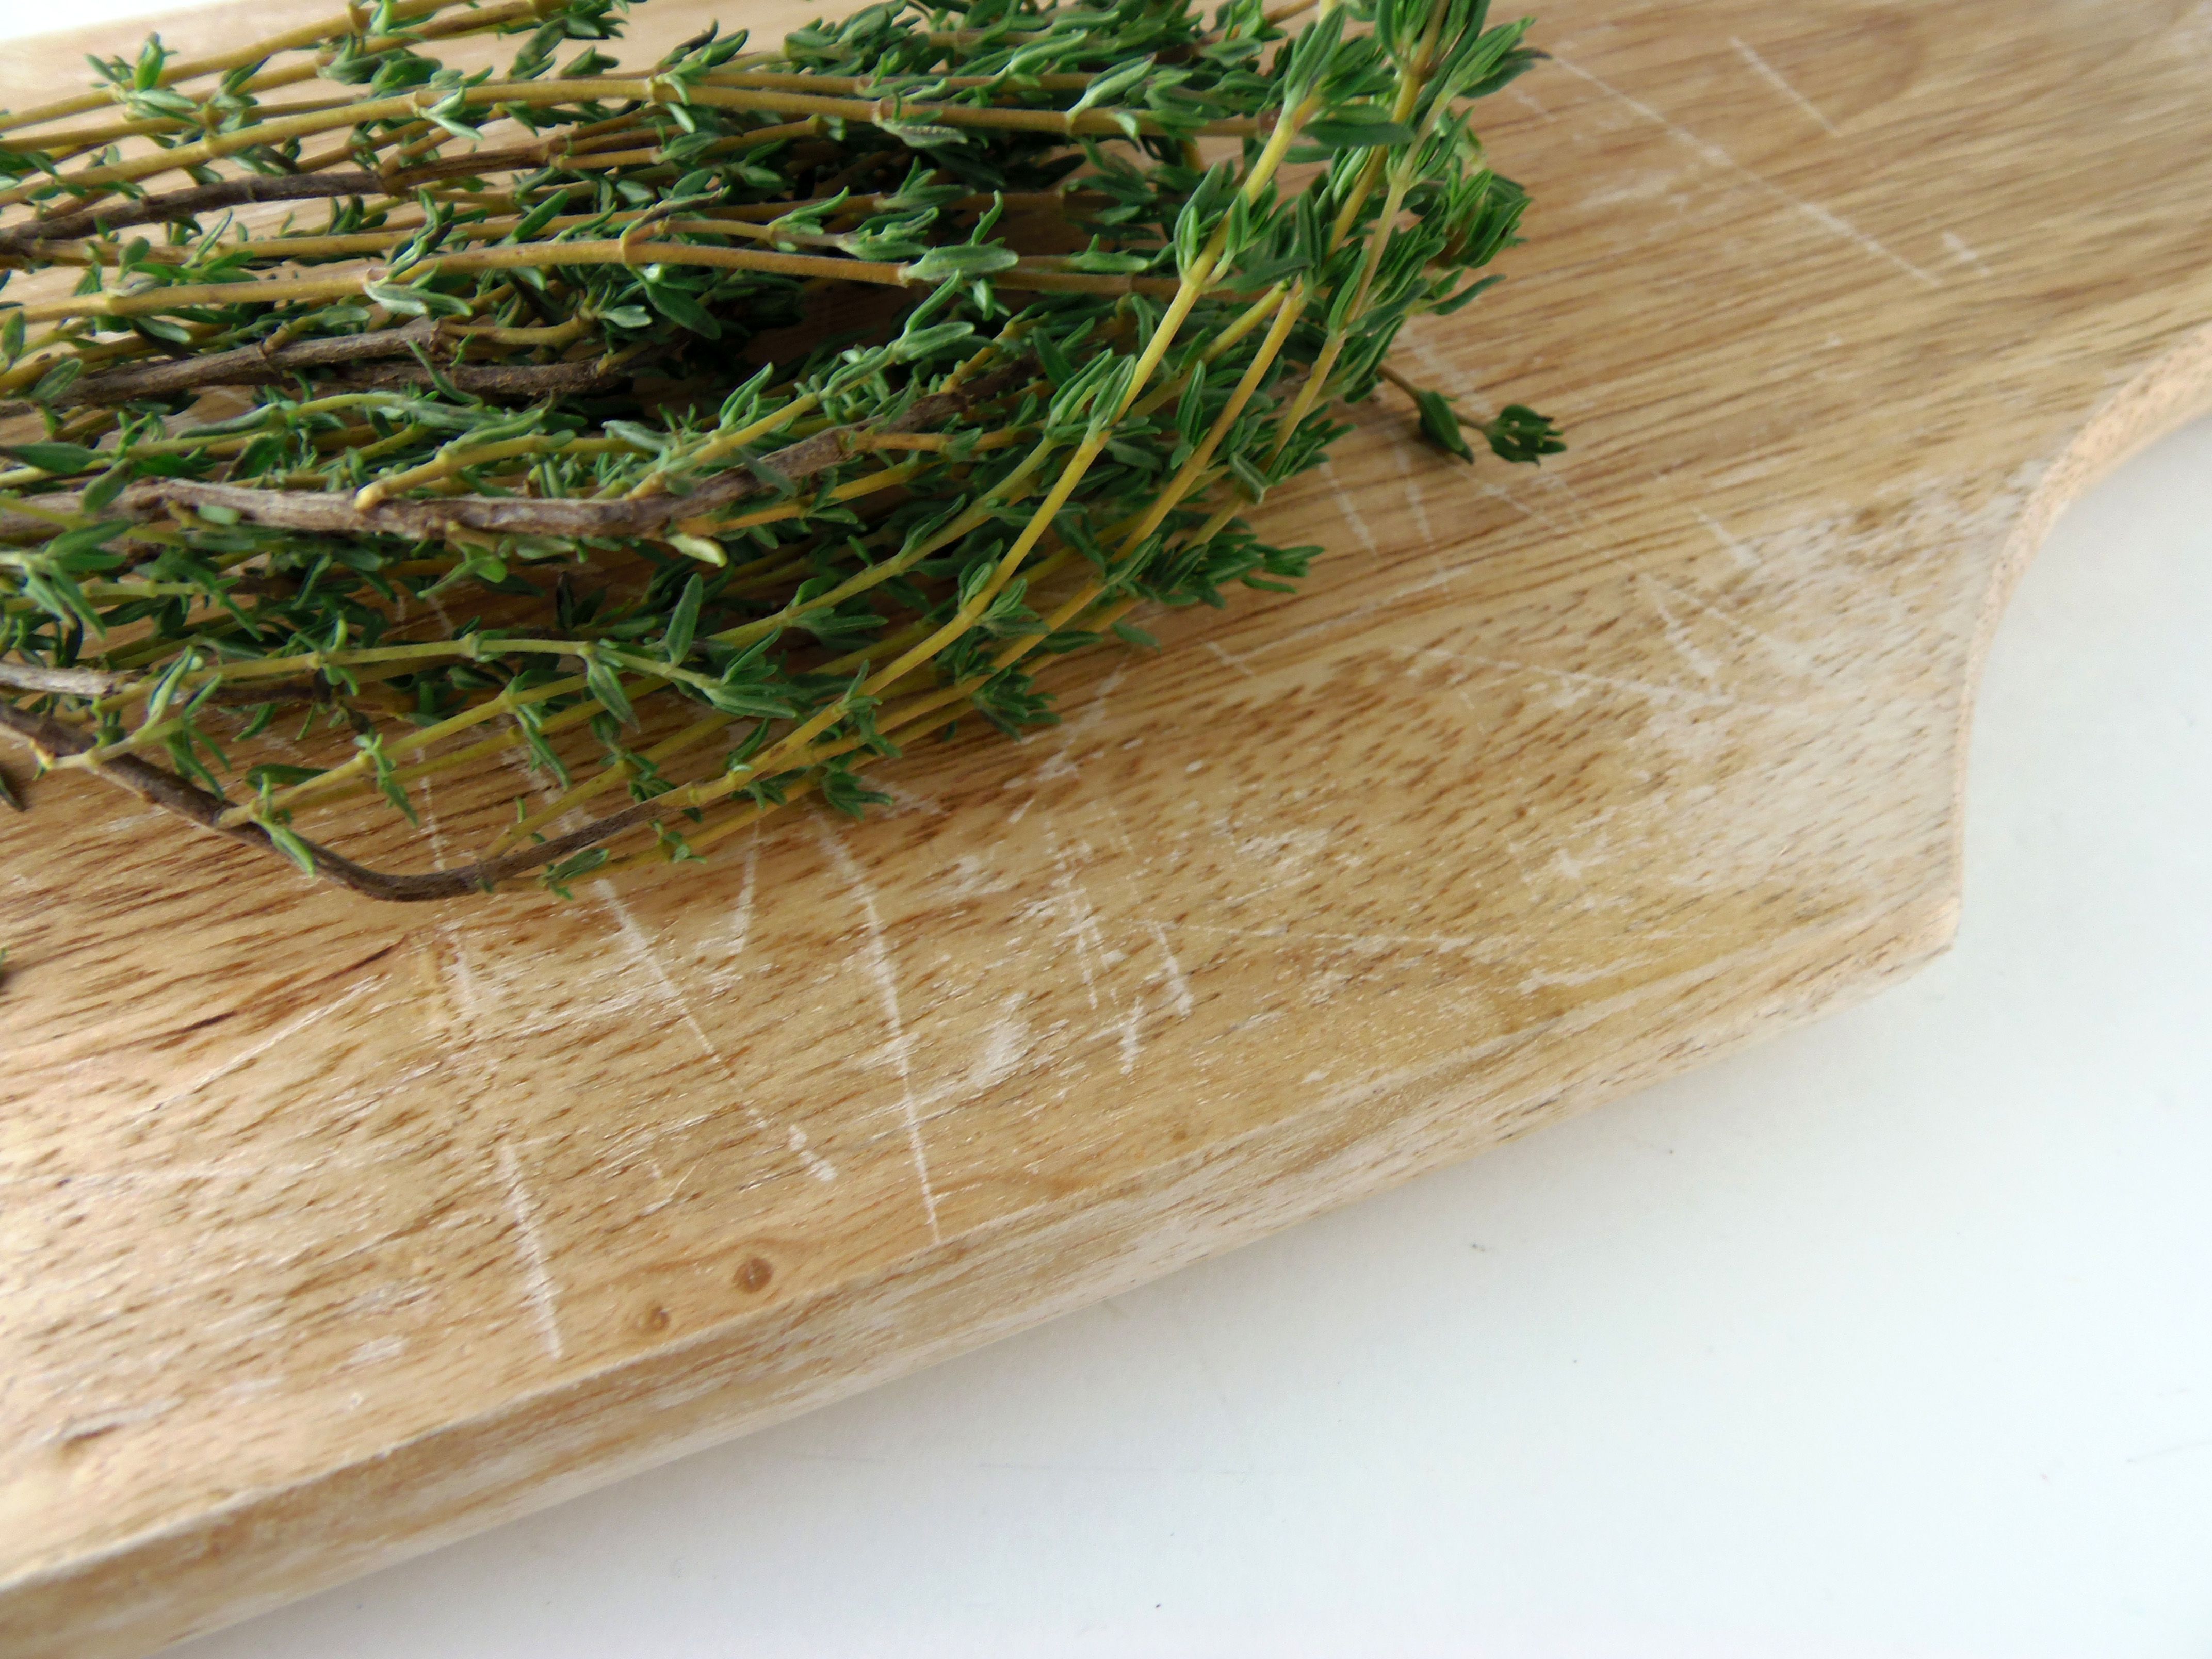 dried leaf thyme substitute